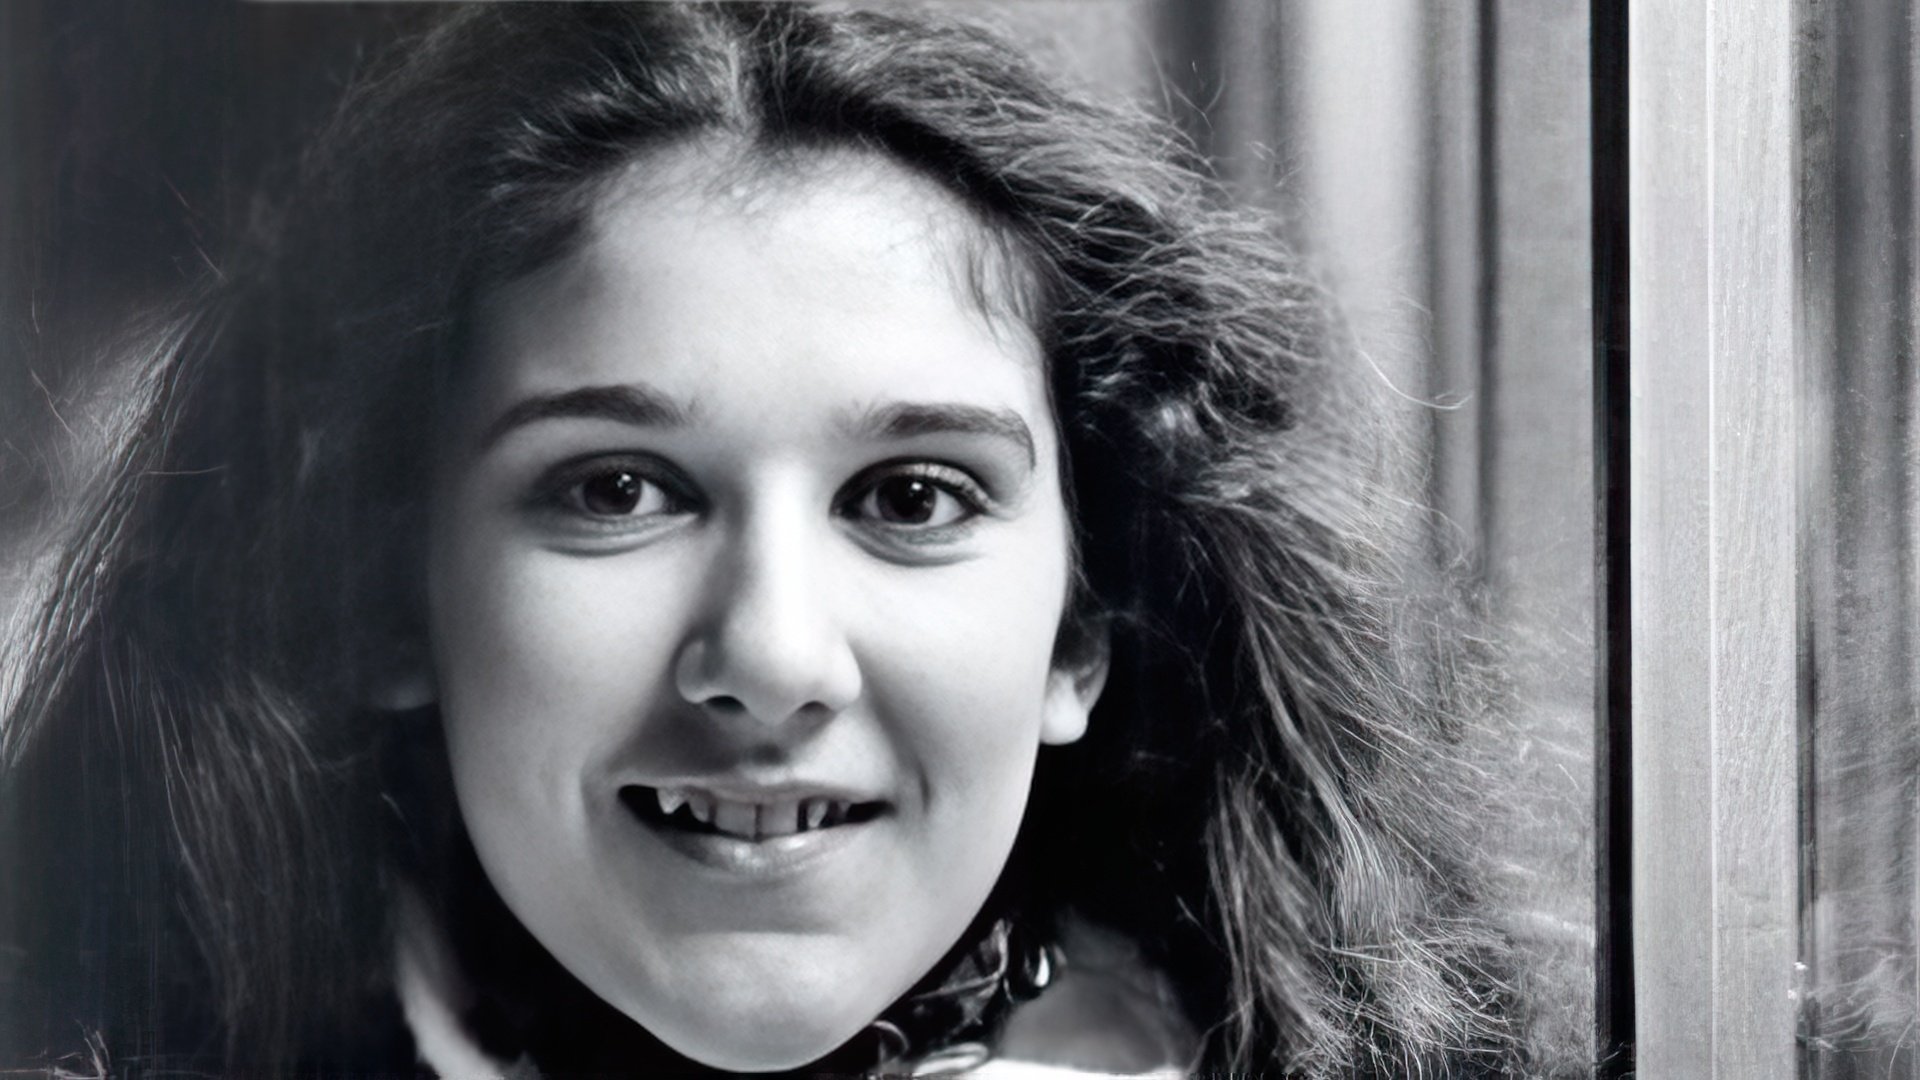 Celine Dion in her youth